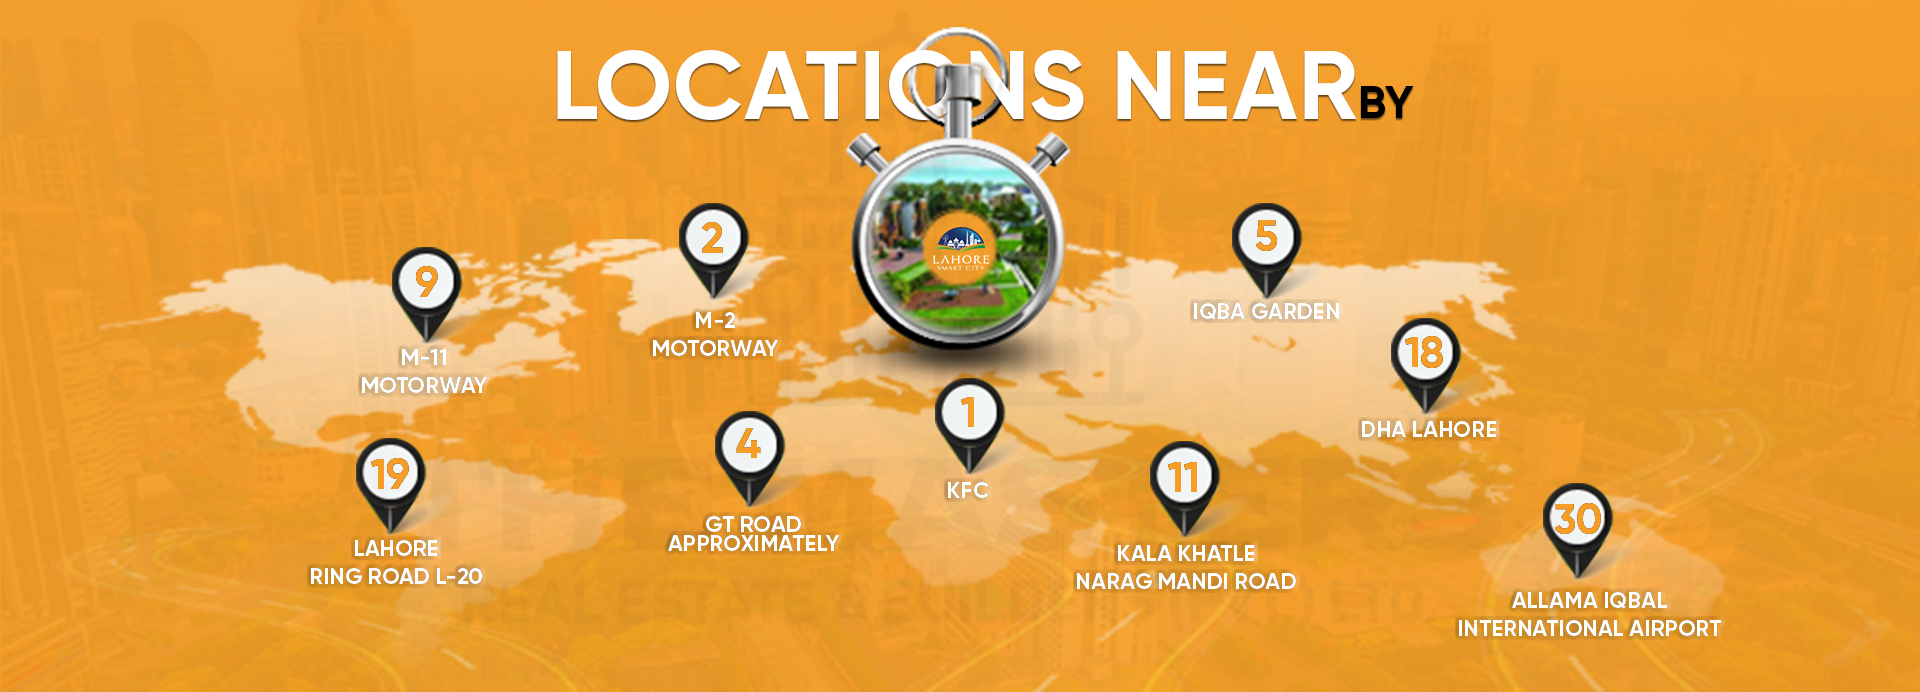 Locations Near By Lahore Smart City